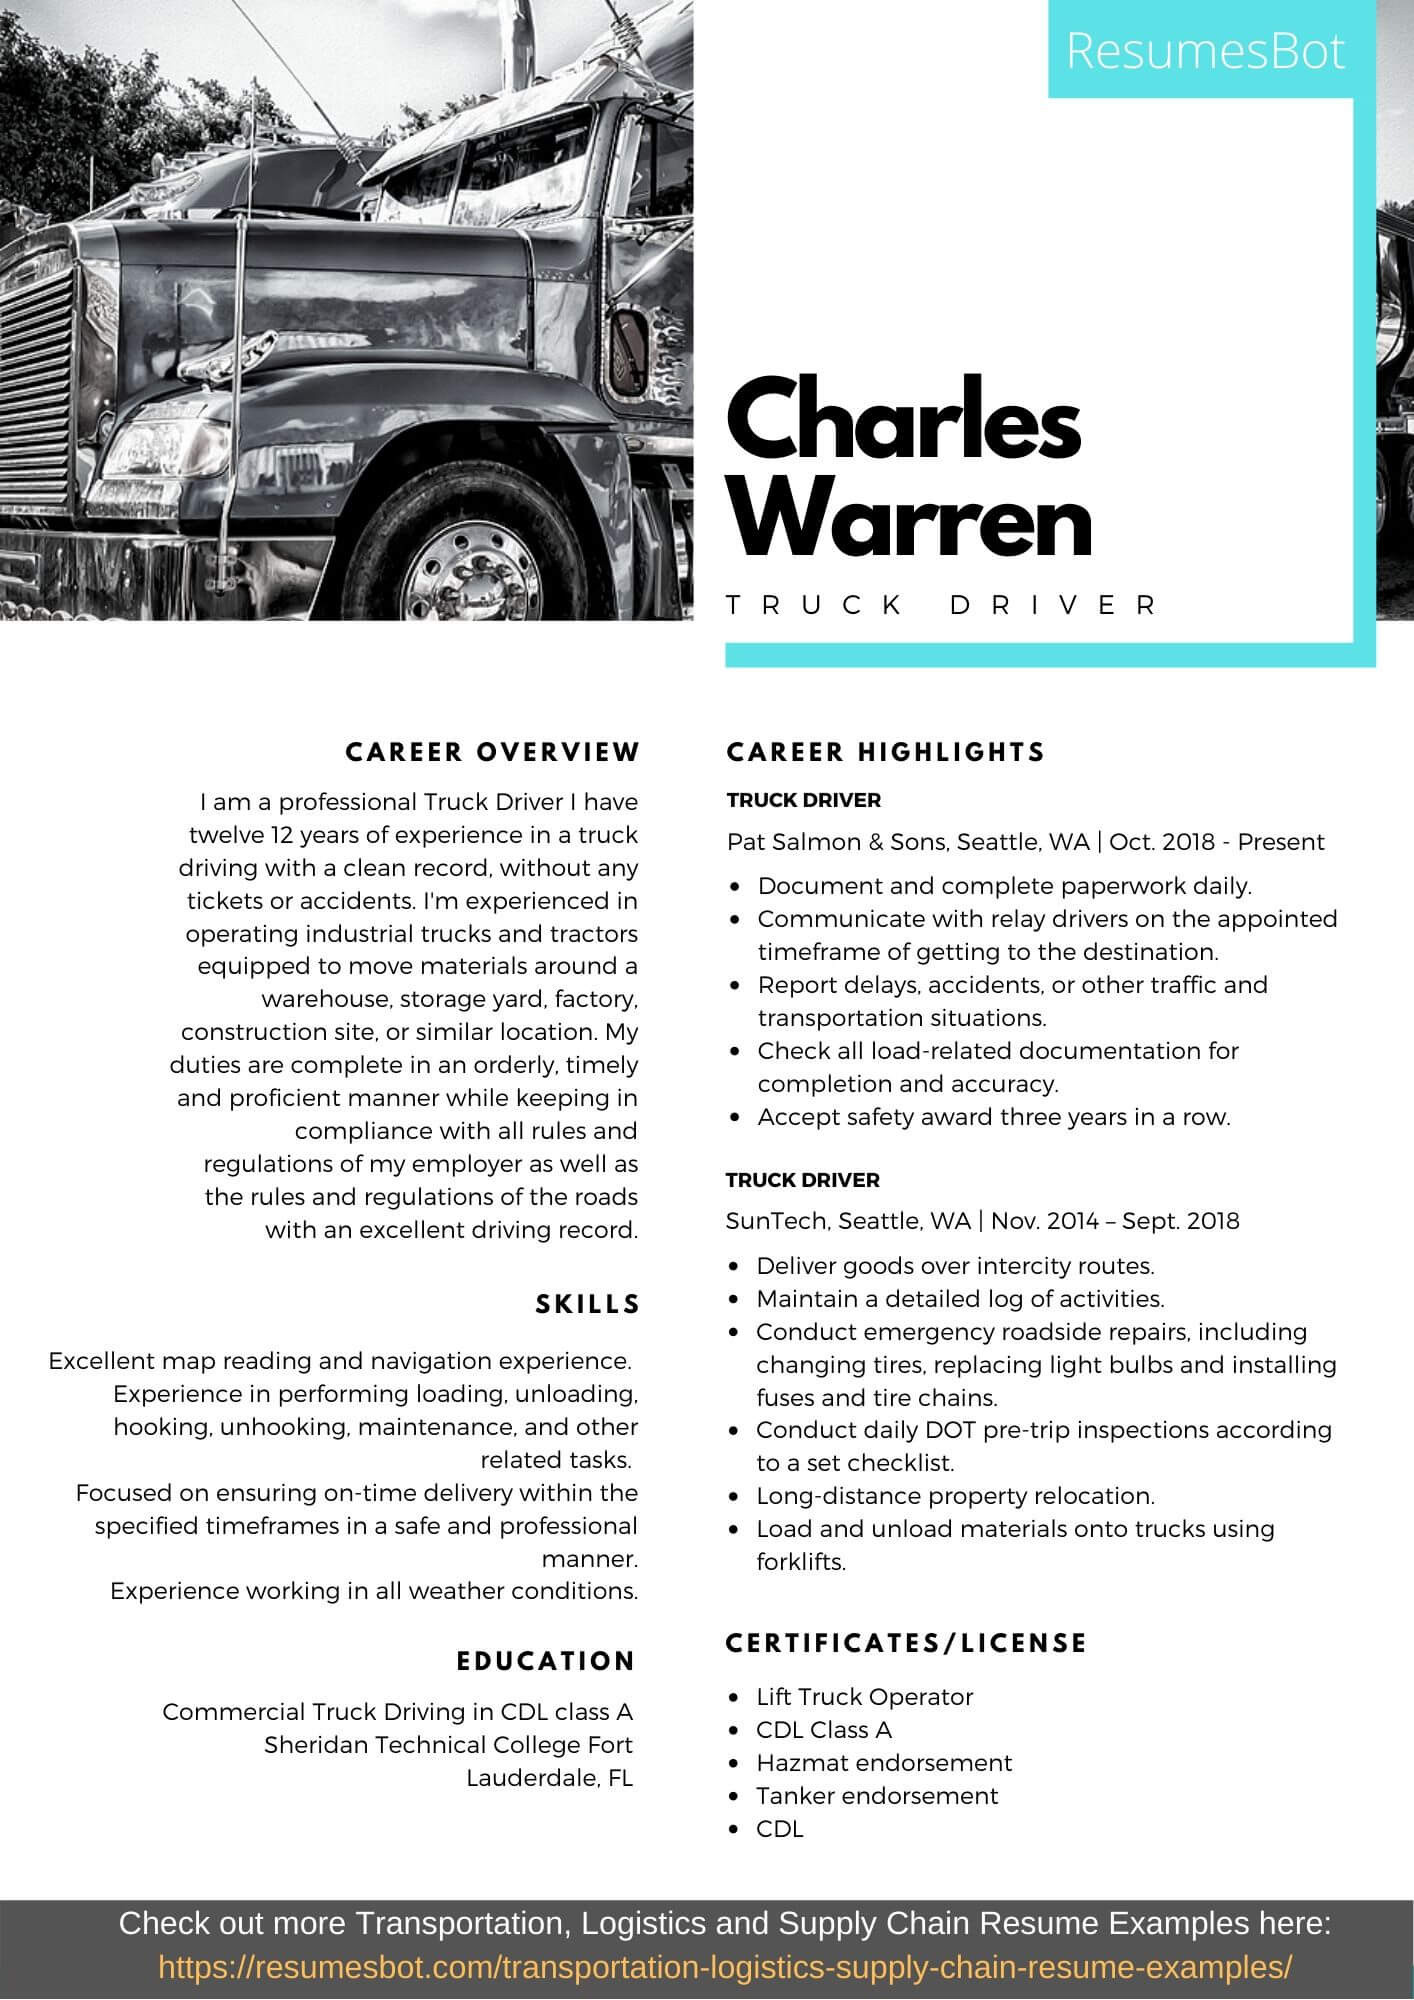 Sample Resume for Cdl Class A Driver Truck Driver Resume Samples and Tips [pdflancarrezekiqdoc] Resumes Bot